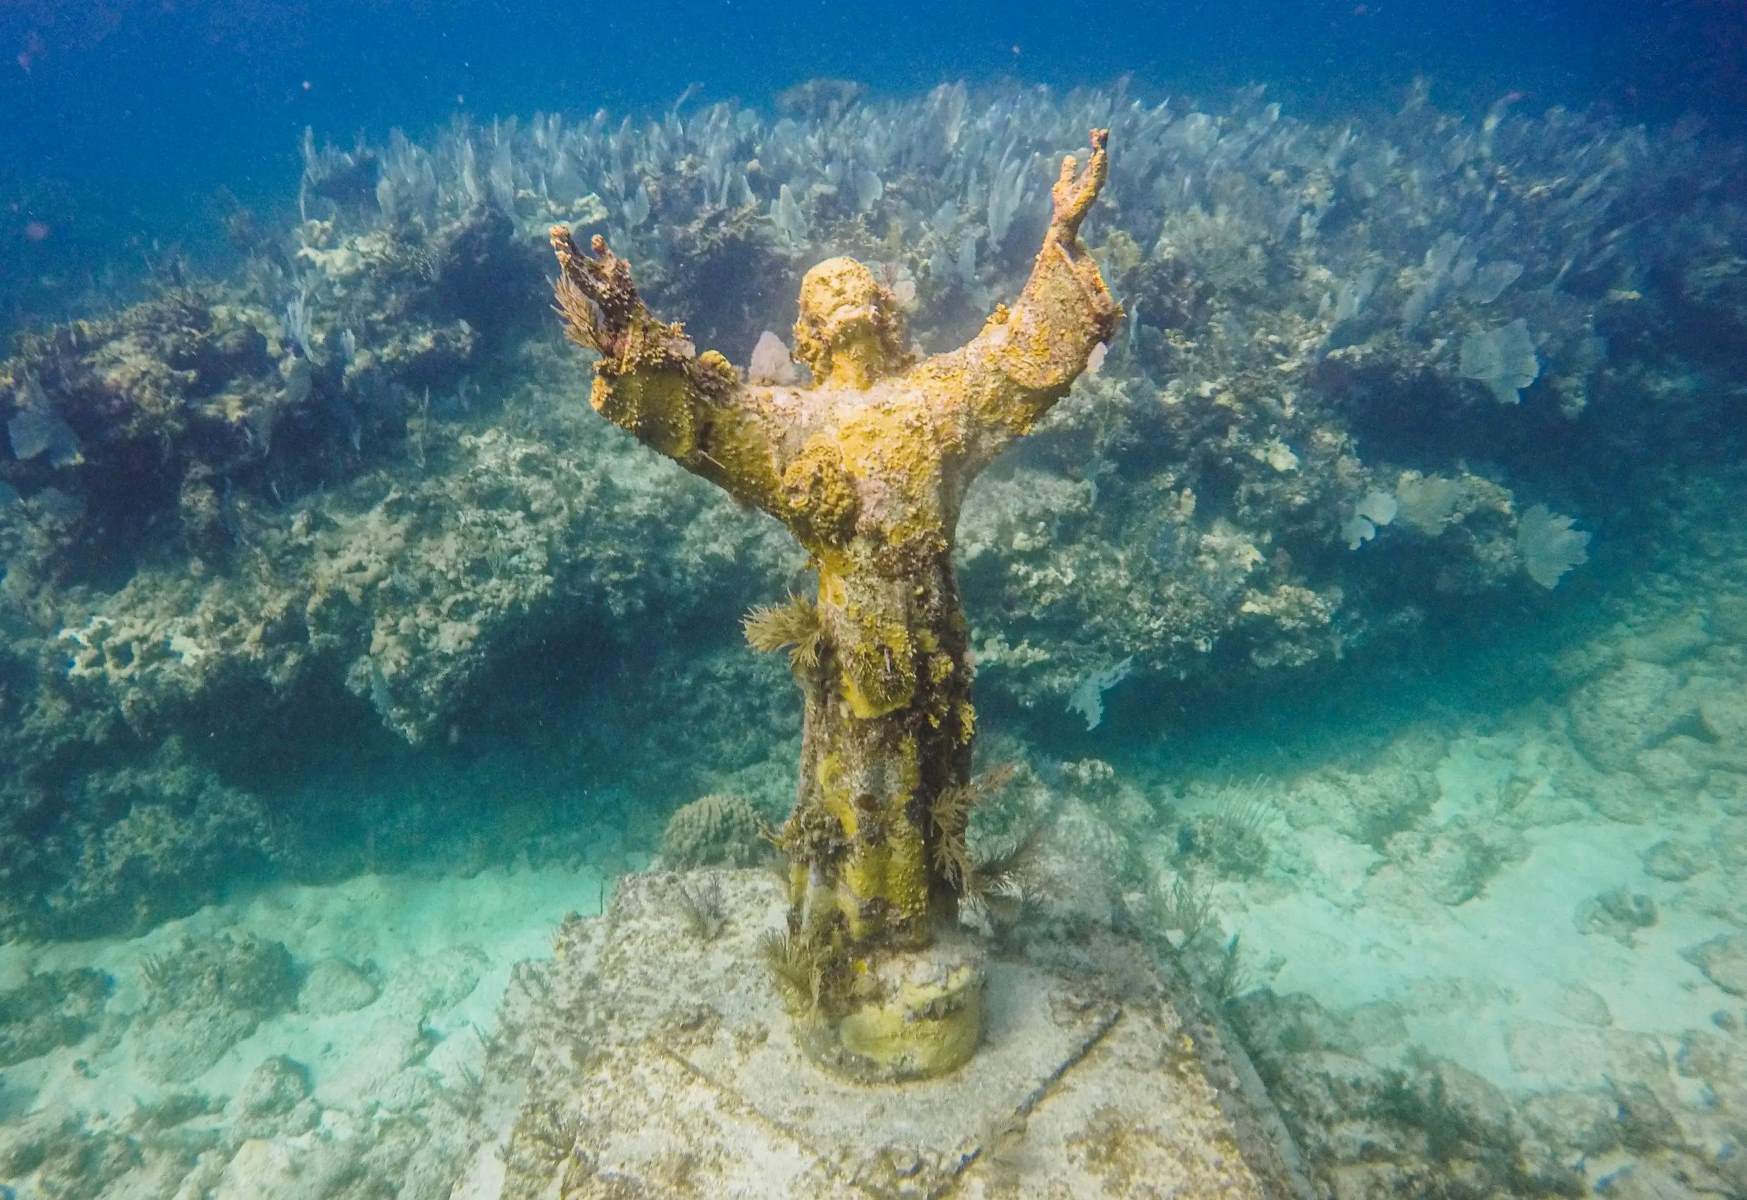 13-astonishing-facts-about-the-christ-of-the-abyss